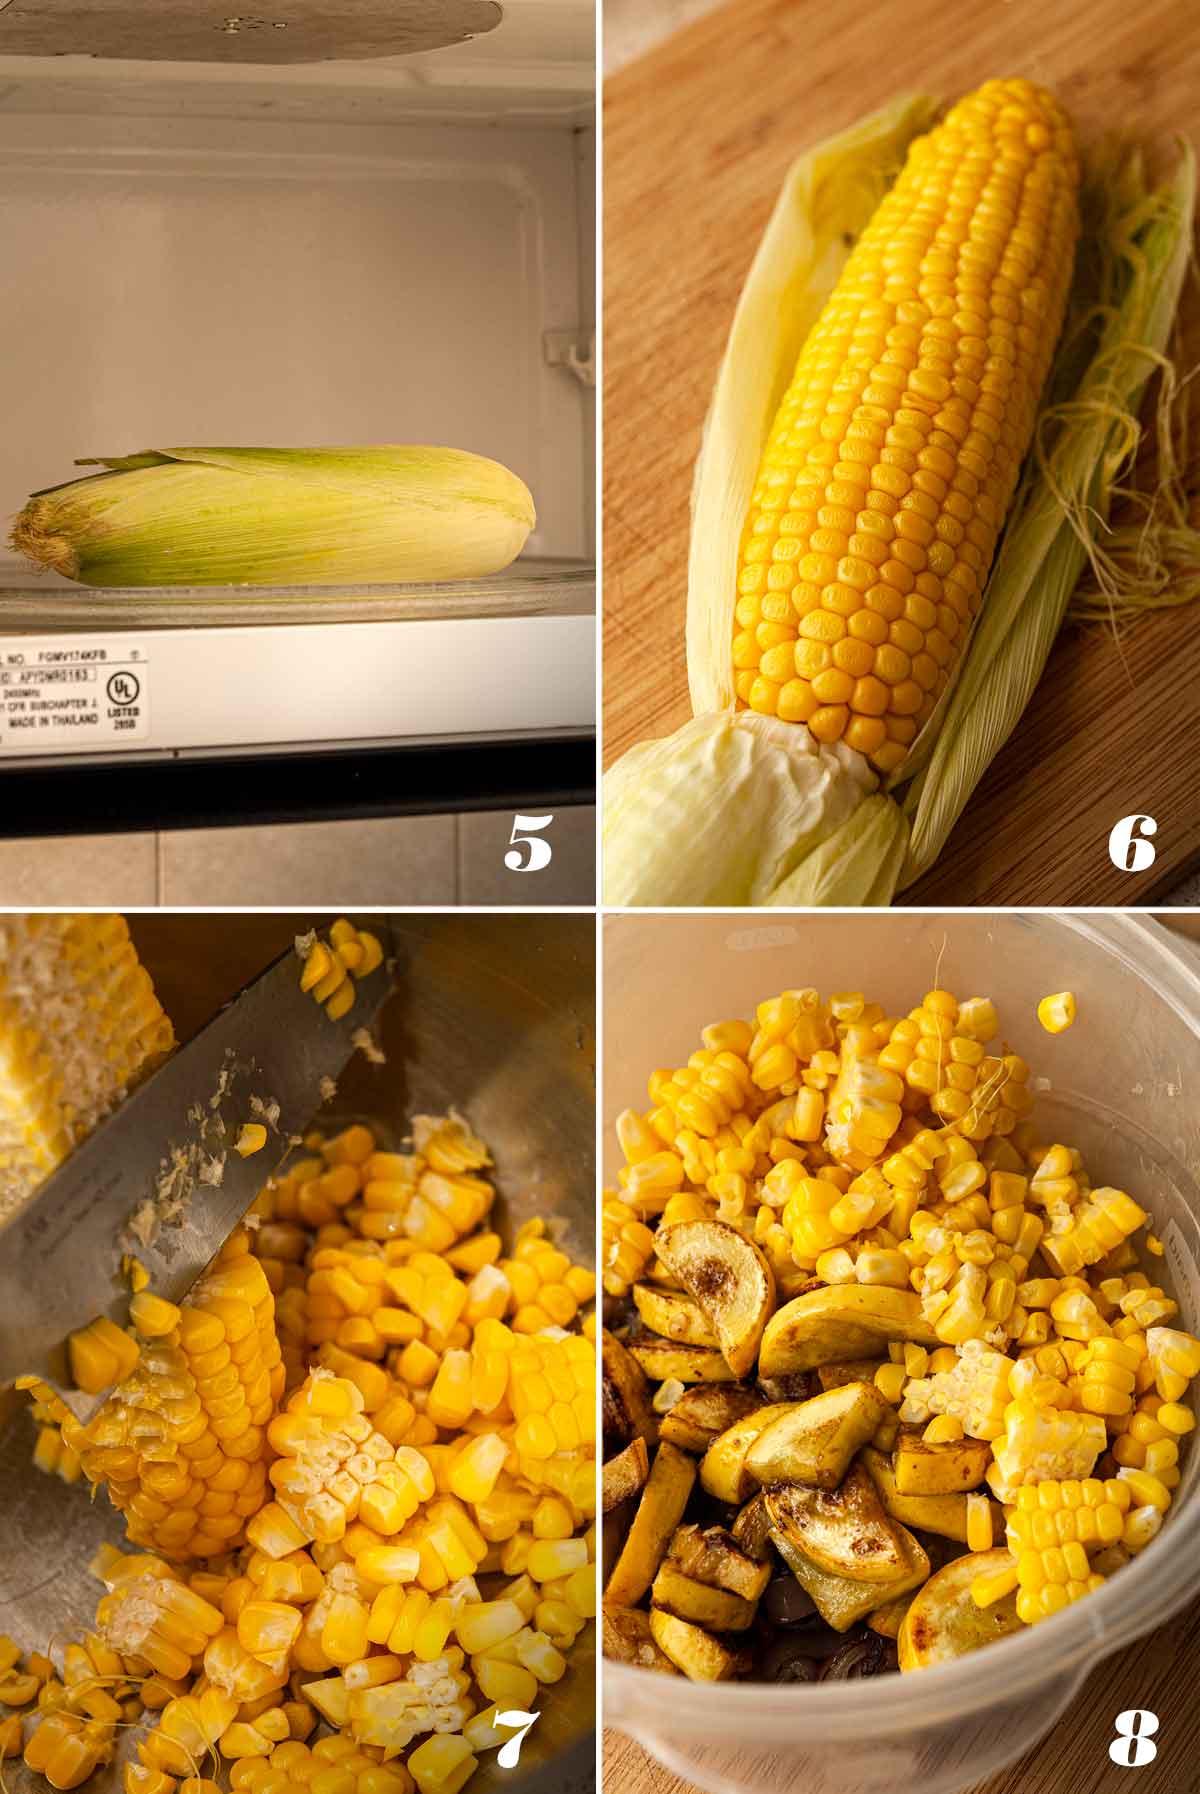 A collage of 4 numbered images showing how to microwave and slice corn.